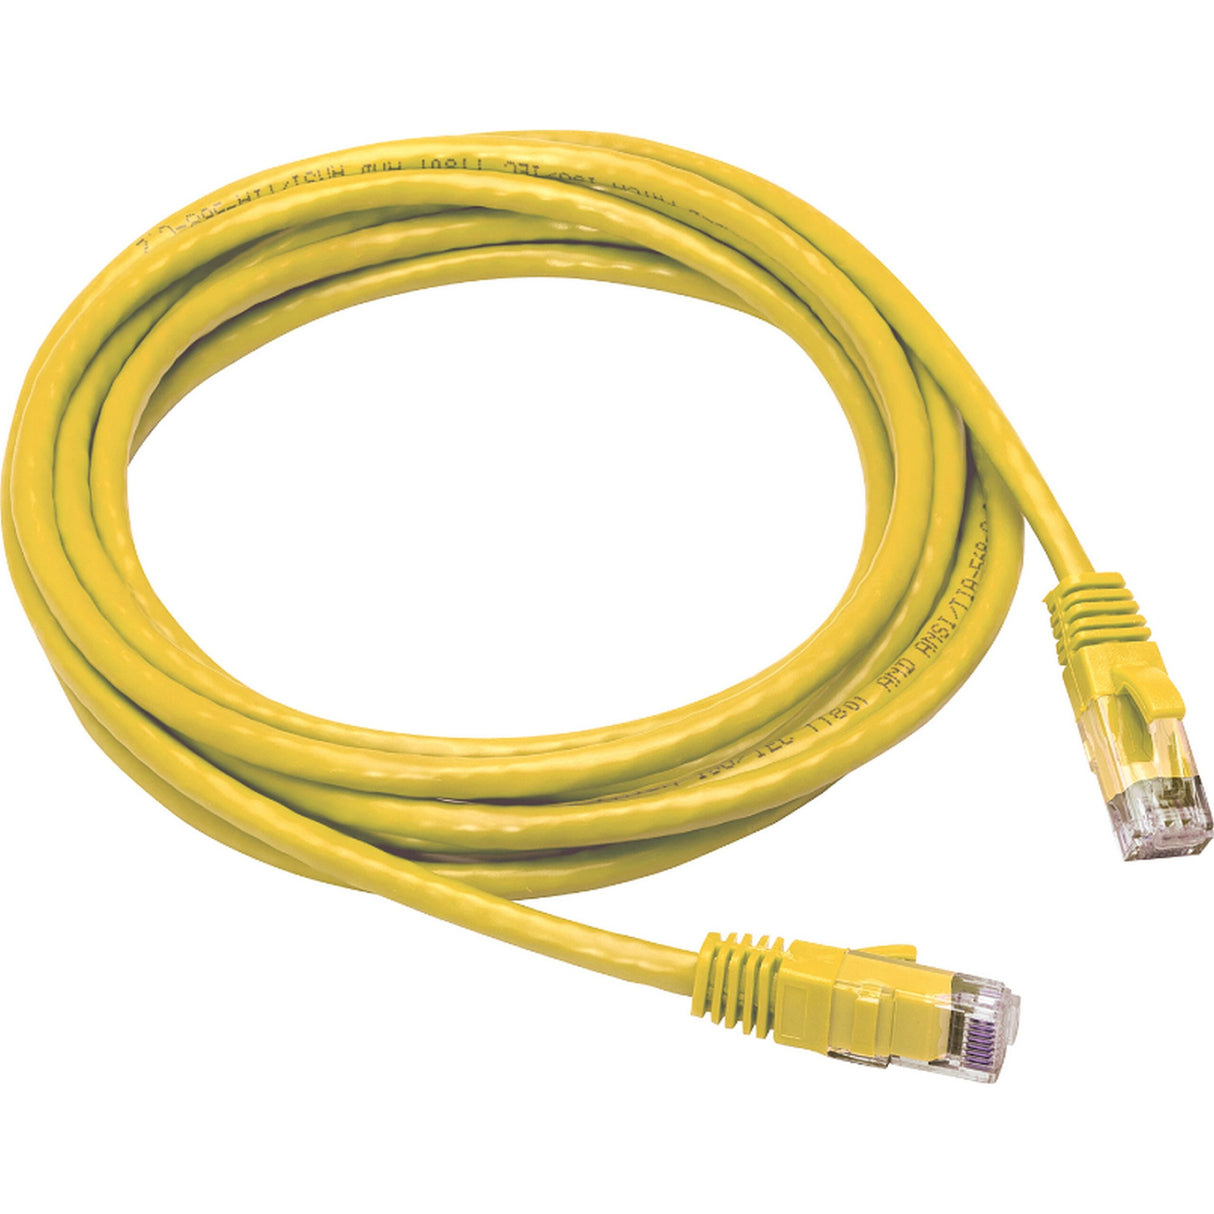 Liberty AV 152G5U4007 Category 5E True 24AWG Patch Cable, 7 Foot, Yellow